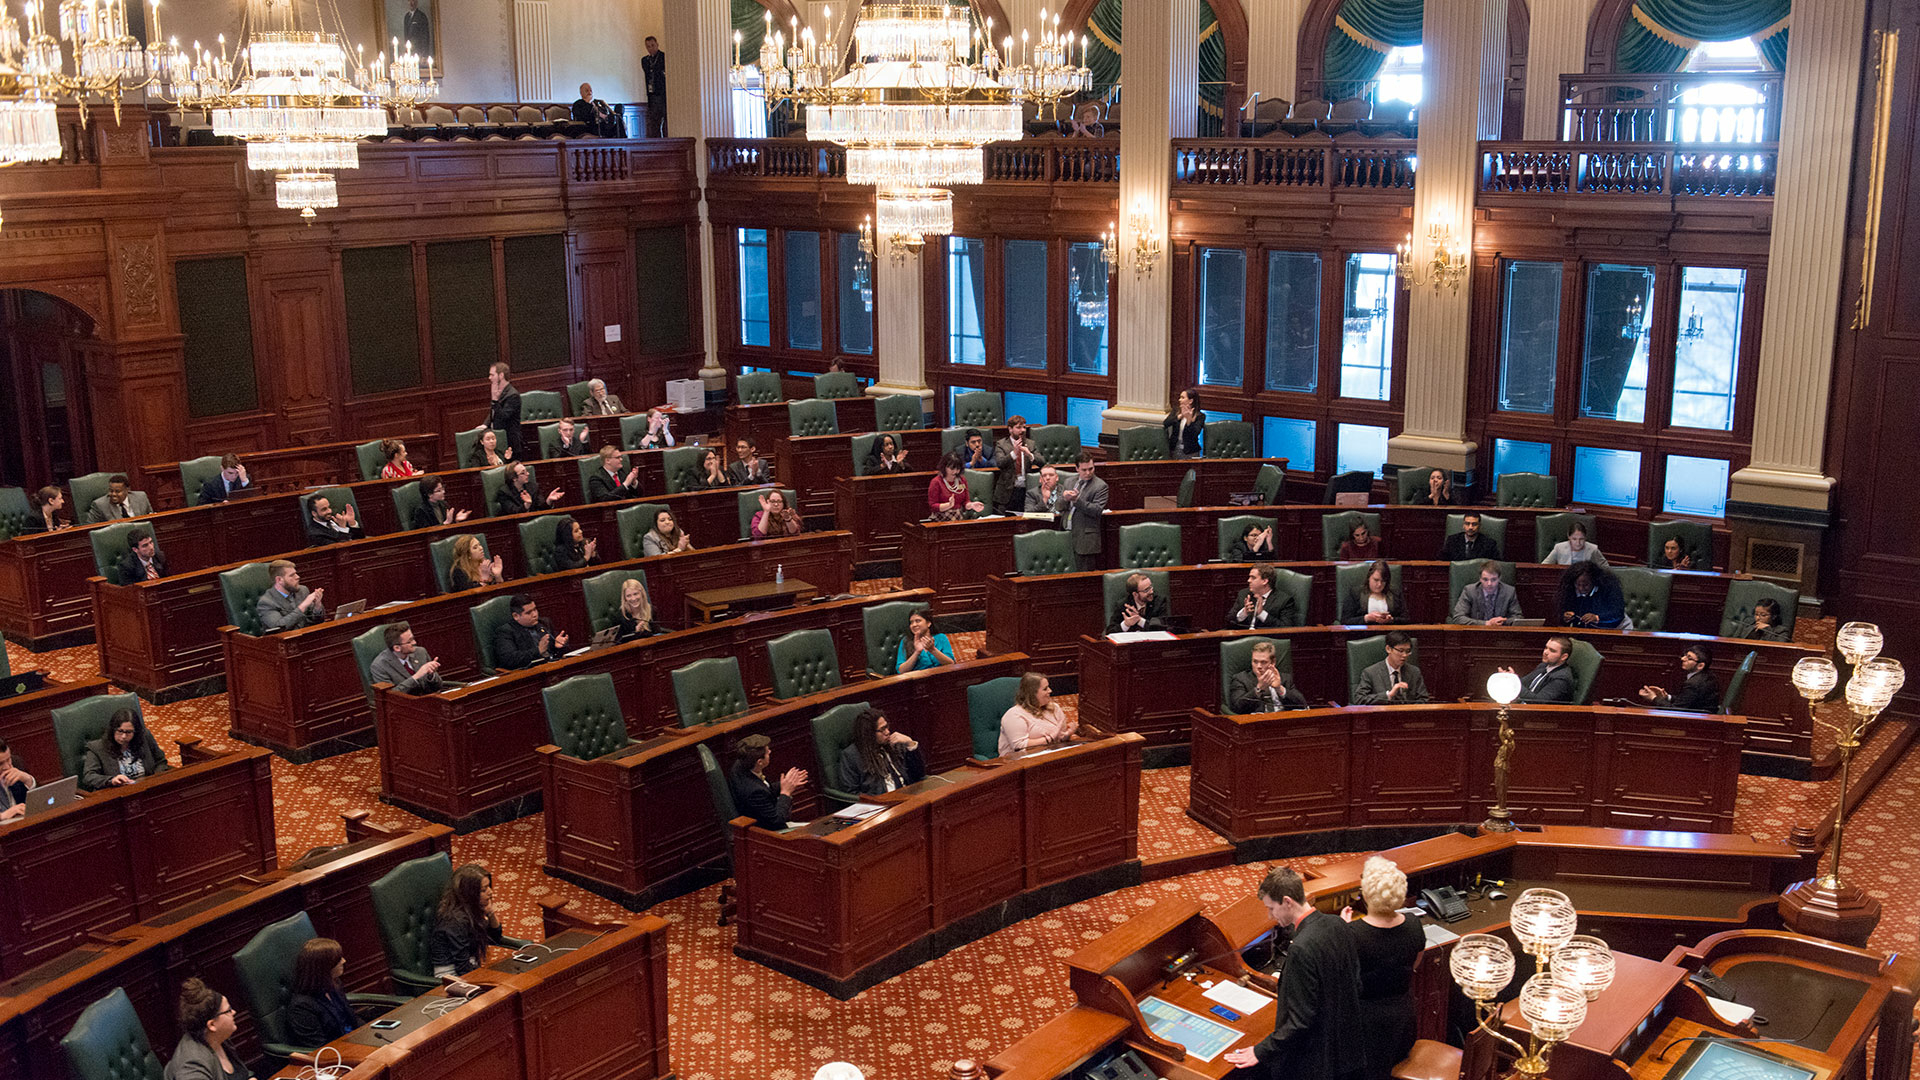 Model Illinois Government meets in House Chambers